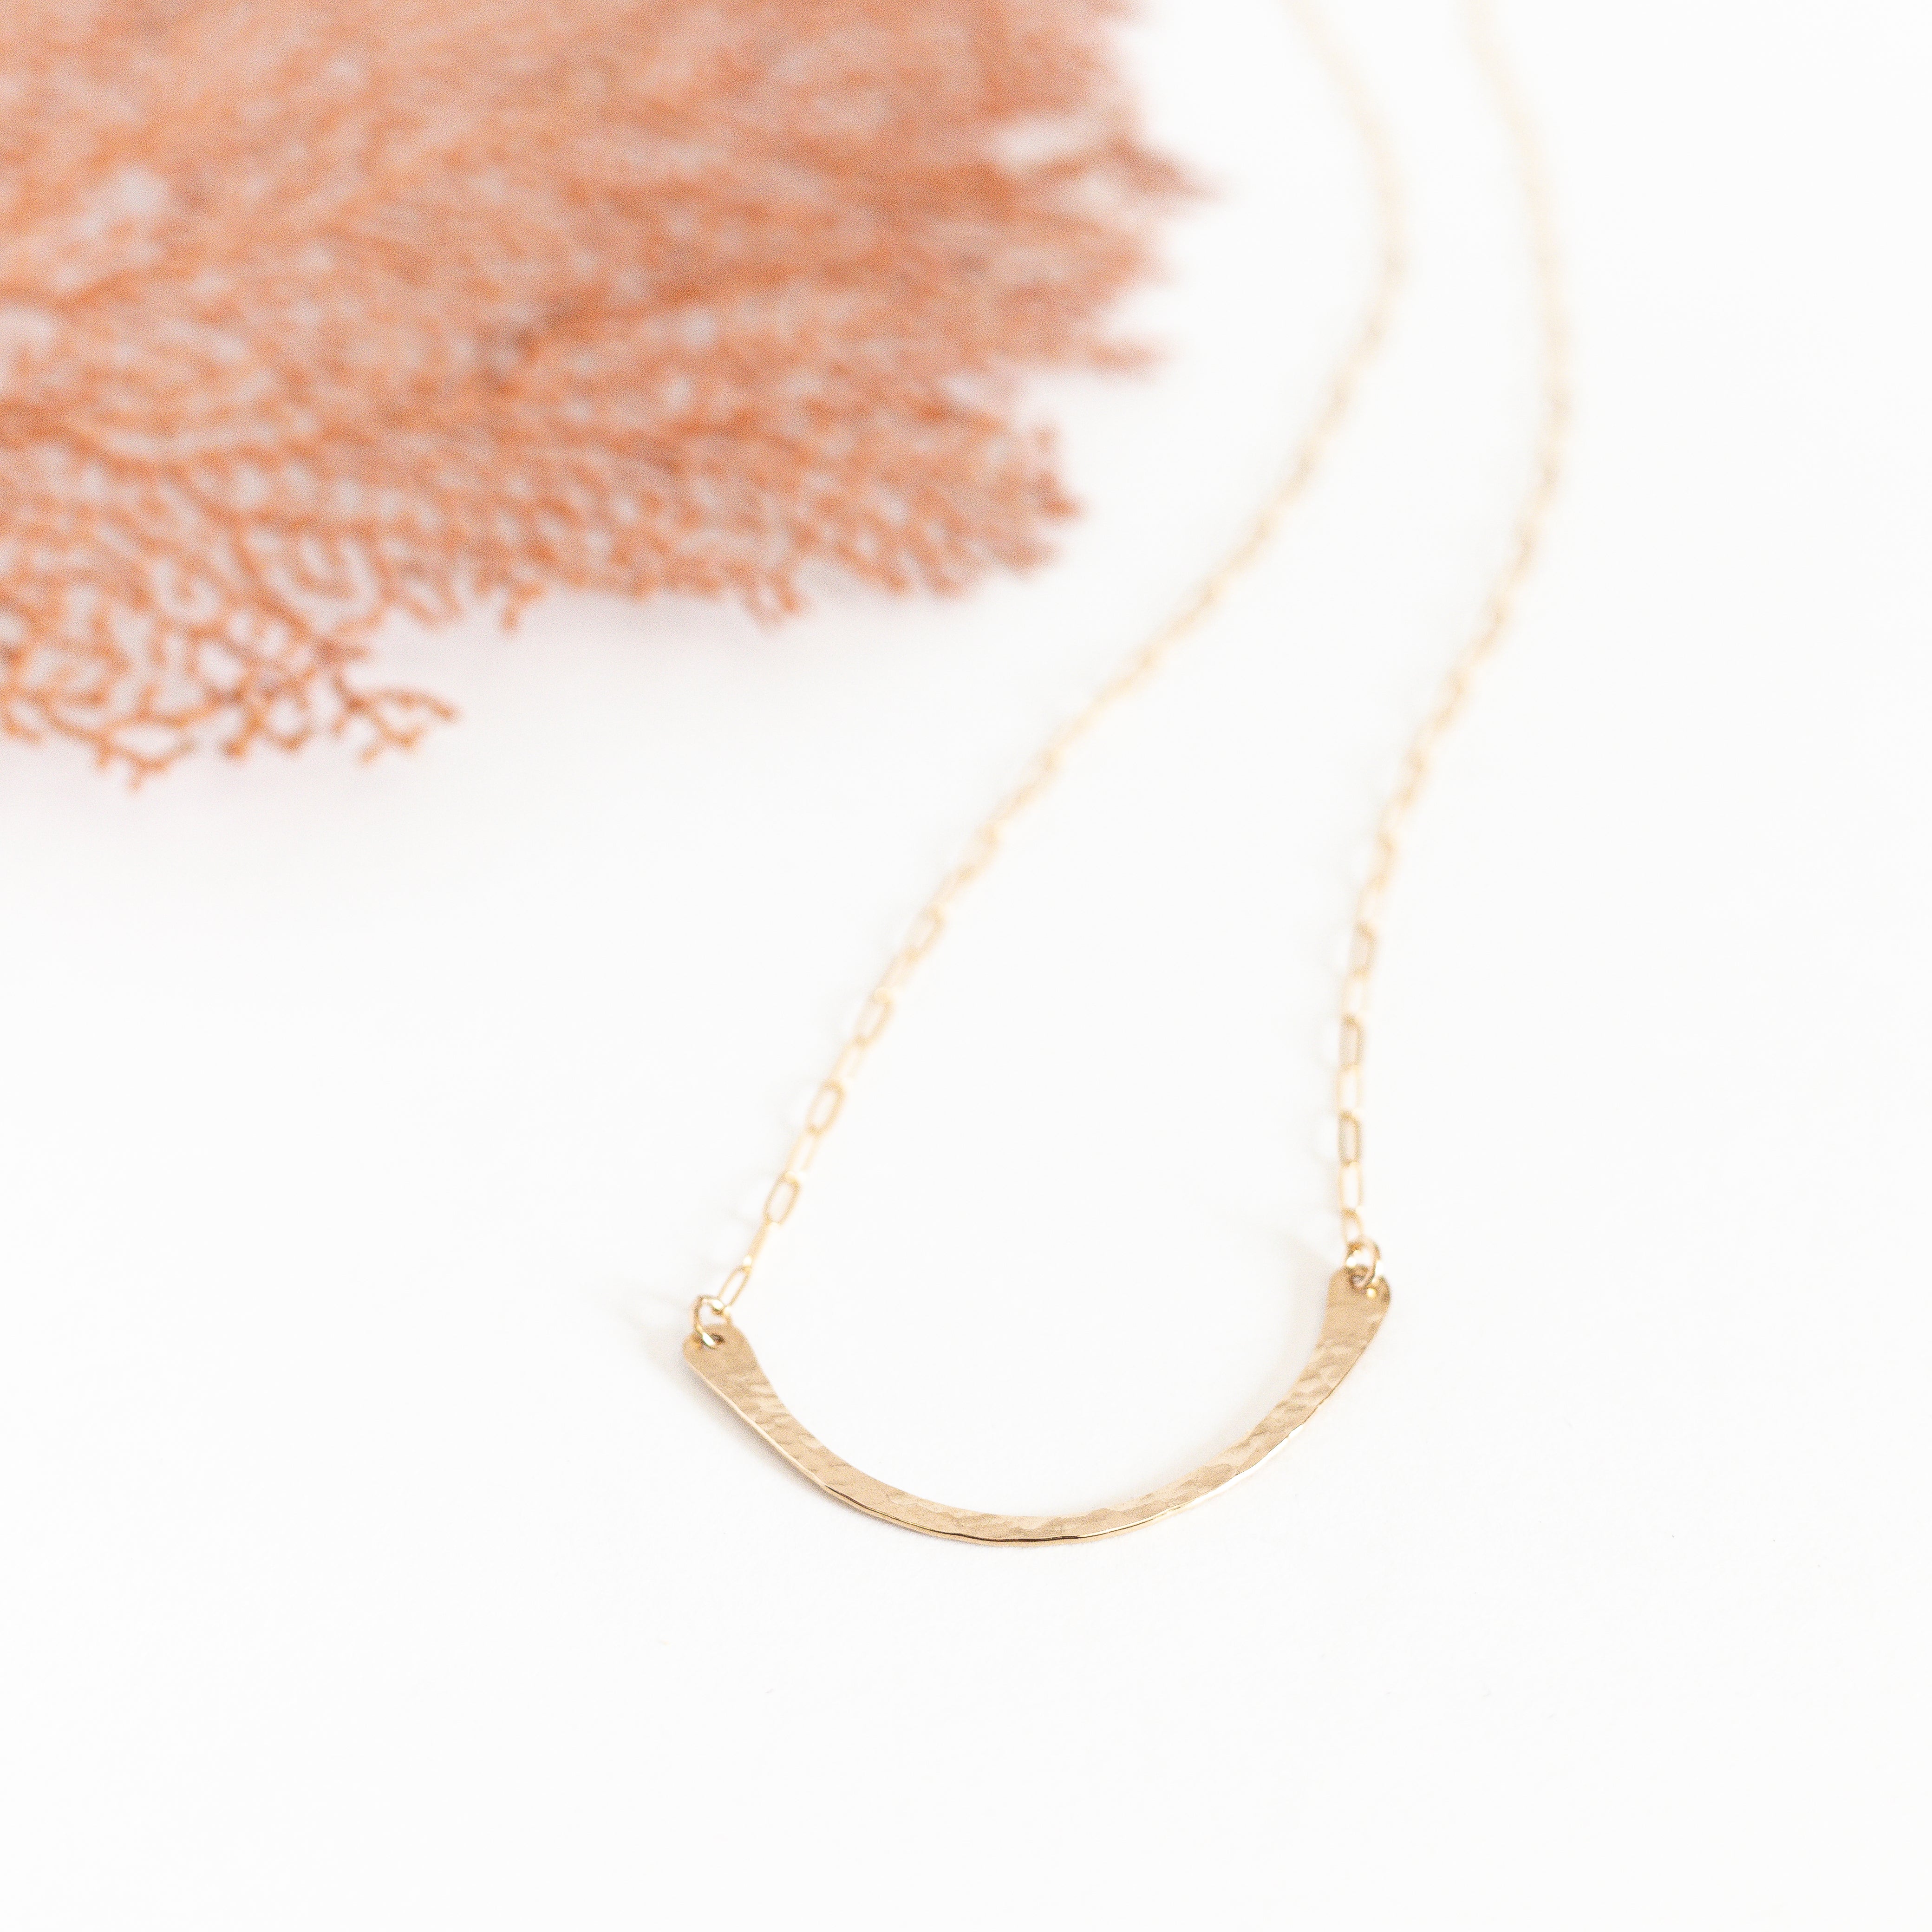 Delicate gold filled hammered bar that is curved in a U shape. attached to our thin paperclip chain.